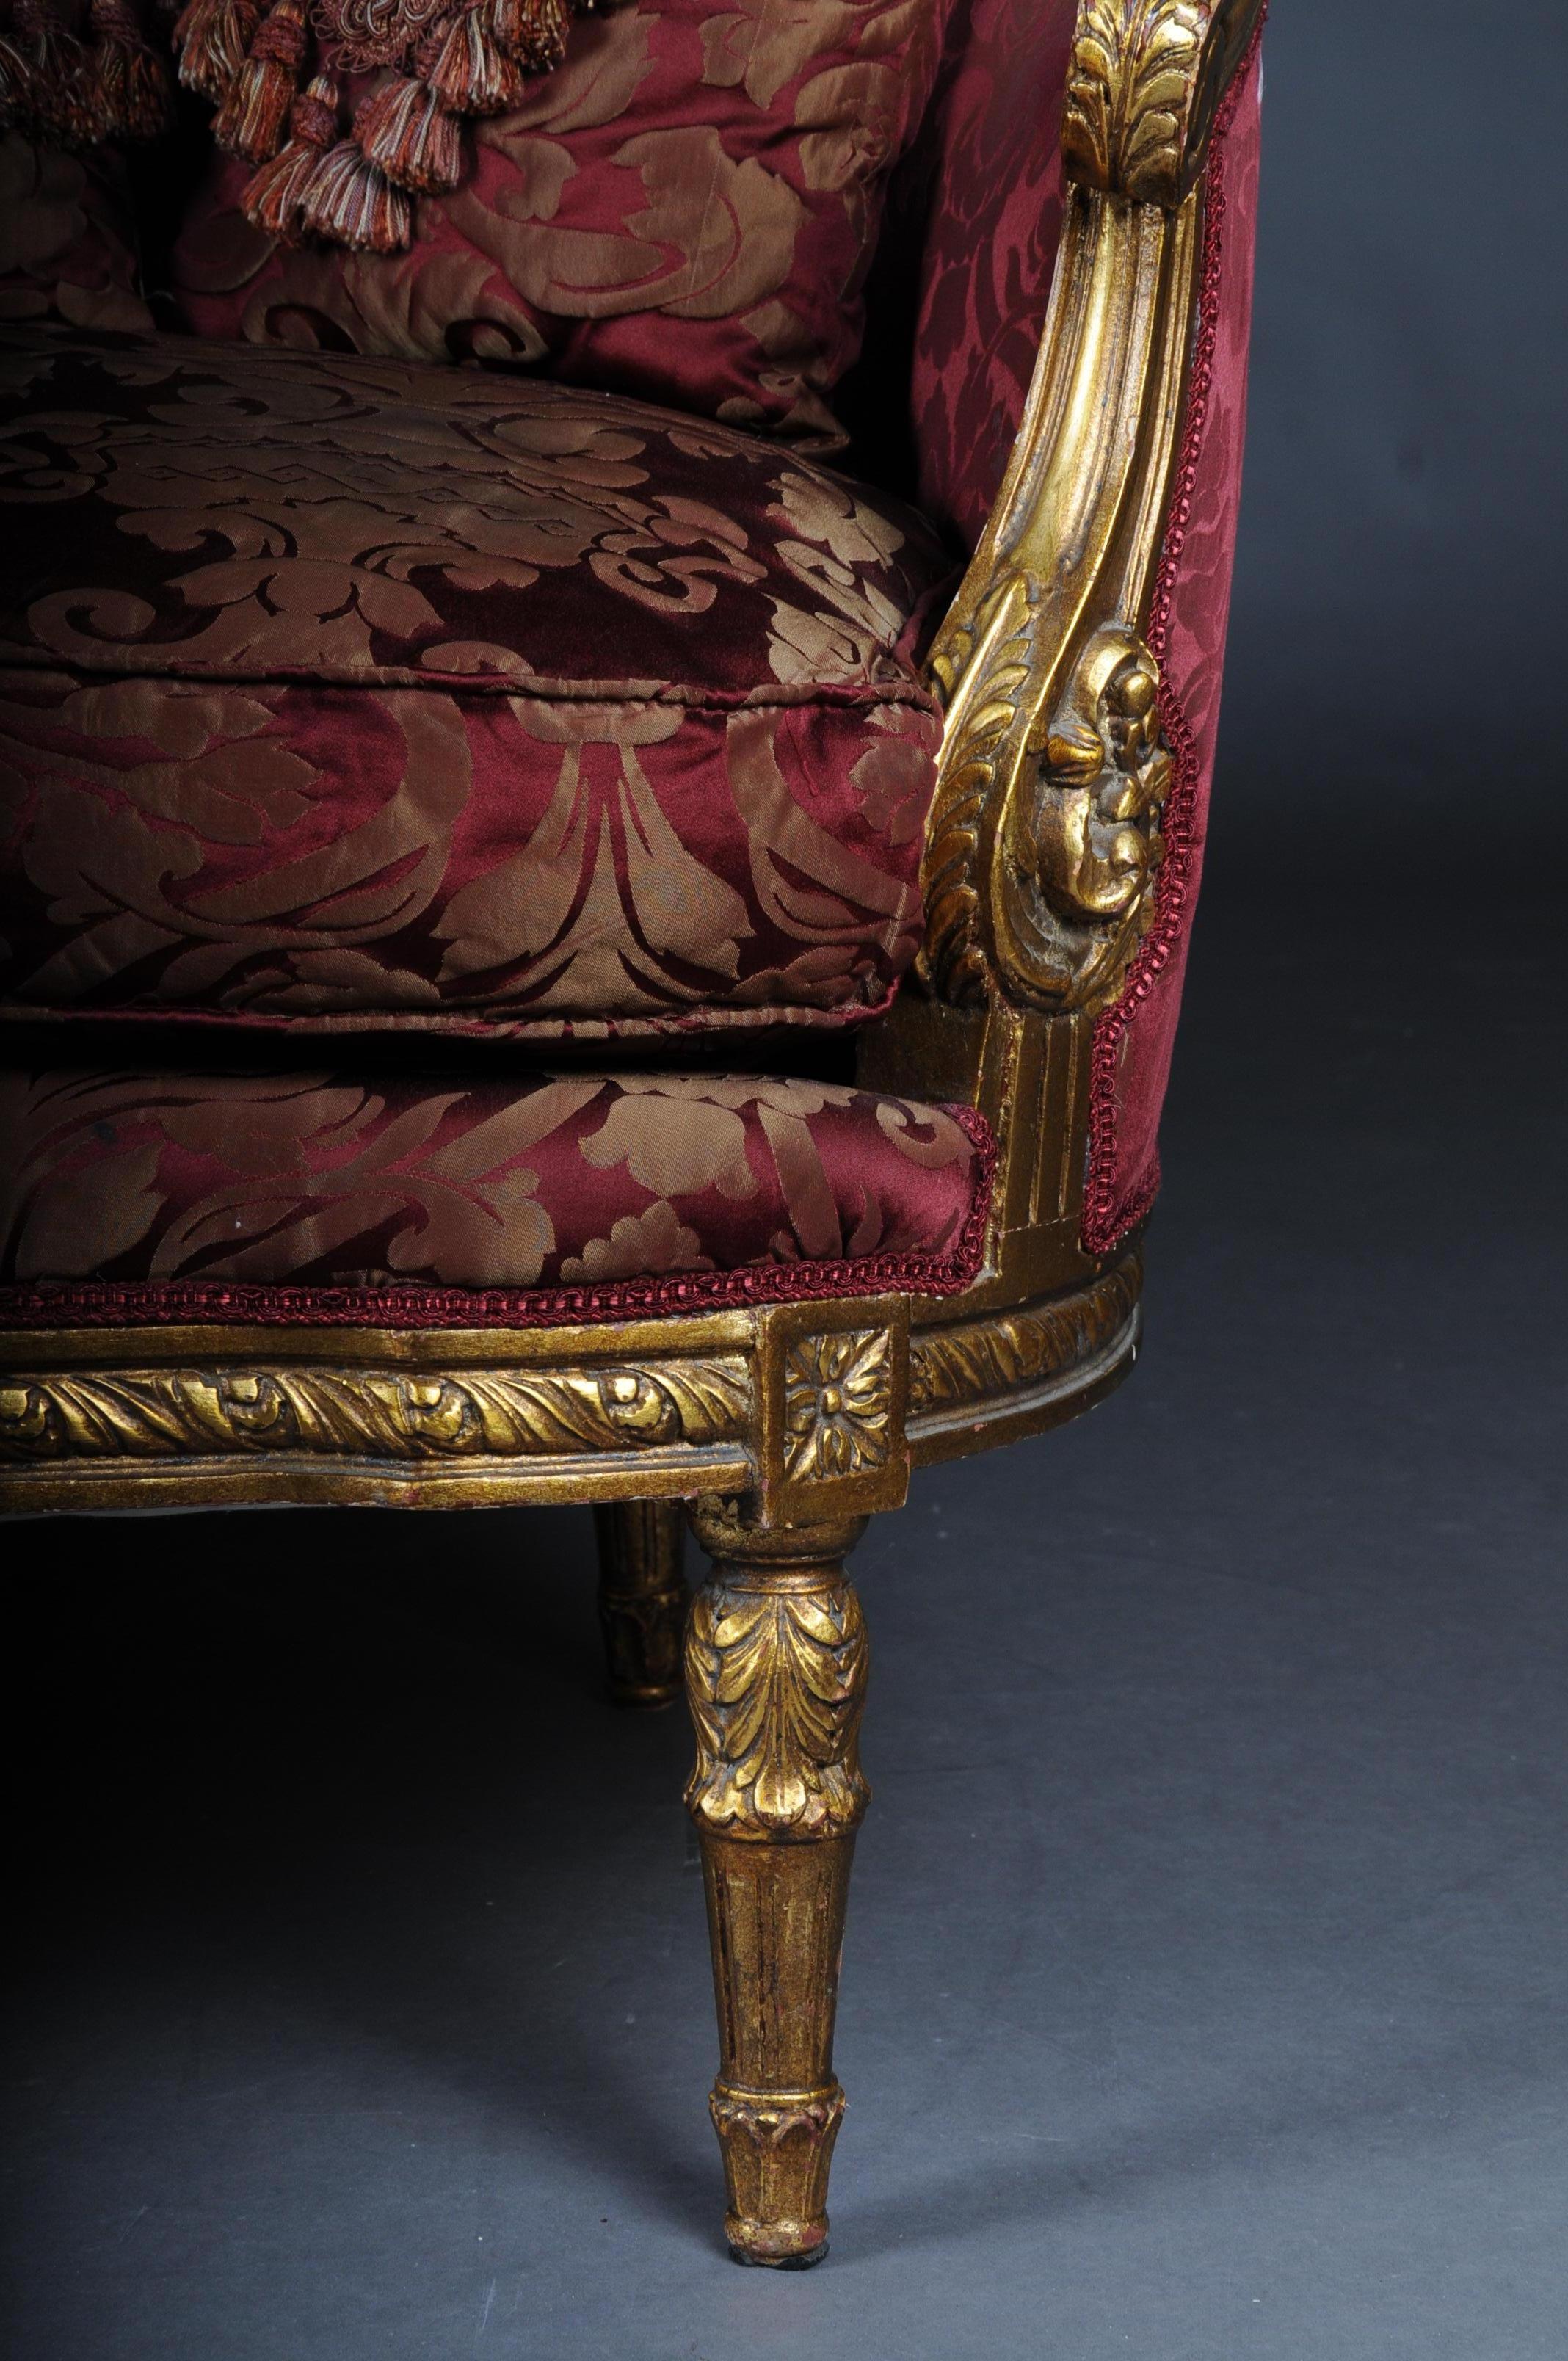 Solid beechwood, carved and gilded. Semicircular rising backrest framing with openwork rocaille crowning. Appropriately curved frame with richly carved foliage. Slightly curved frame on straight legs. Seat and backrest are finished with a